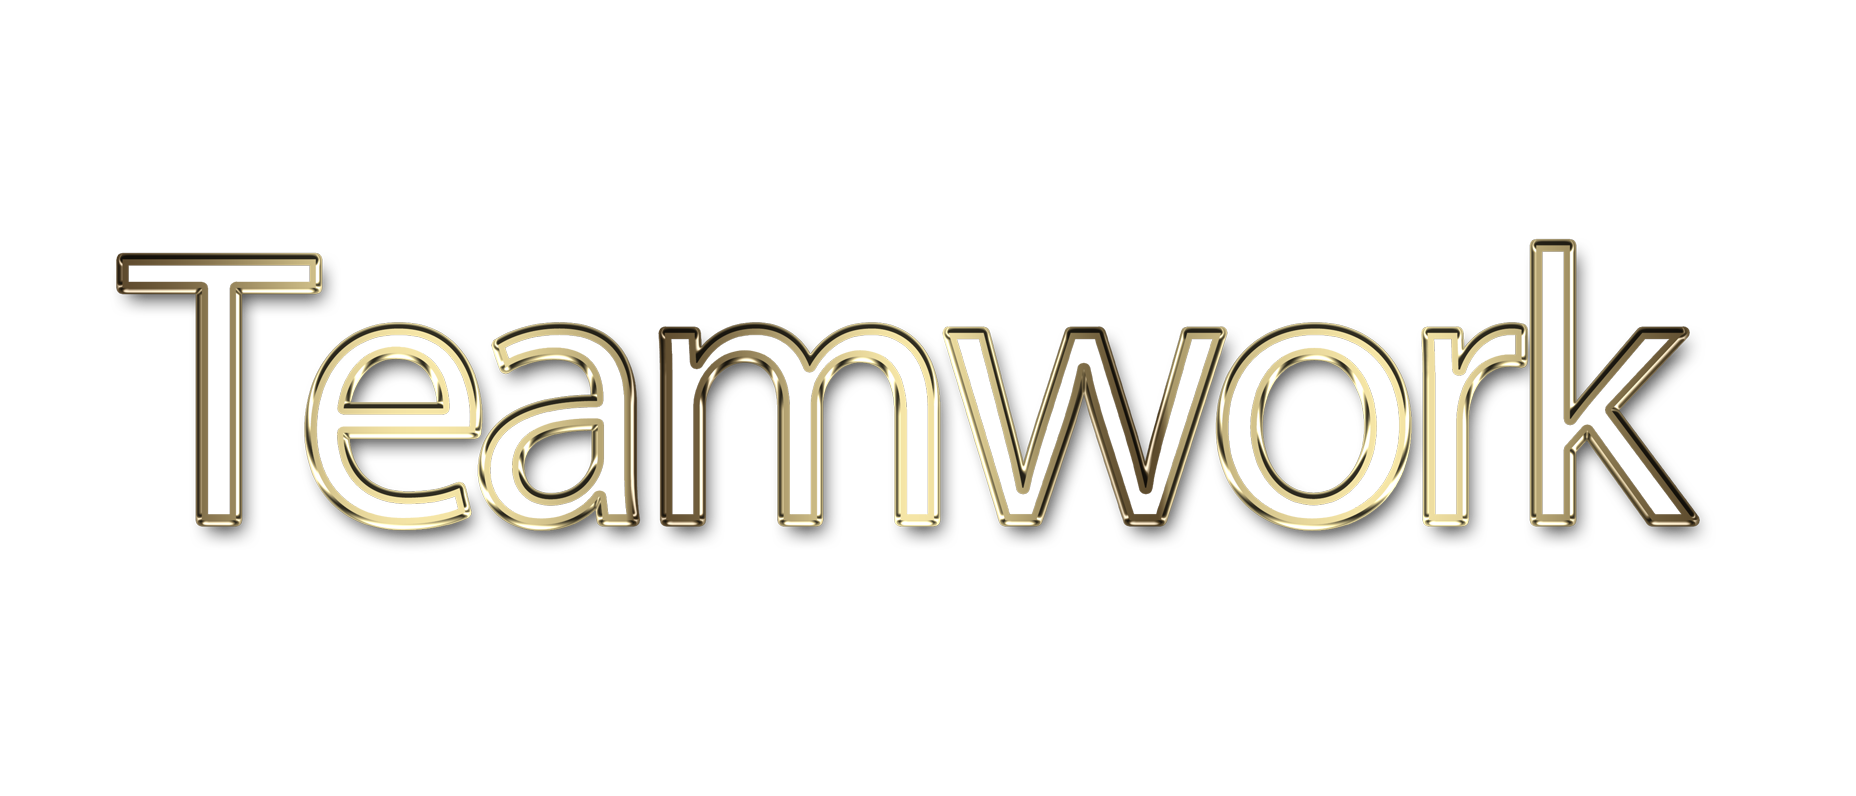 Teamwork png, word Teamwork png, Teamwork word png, Teamwork text png, Teamwork letters png, Teamwork word art typography PNG images, transparent png